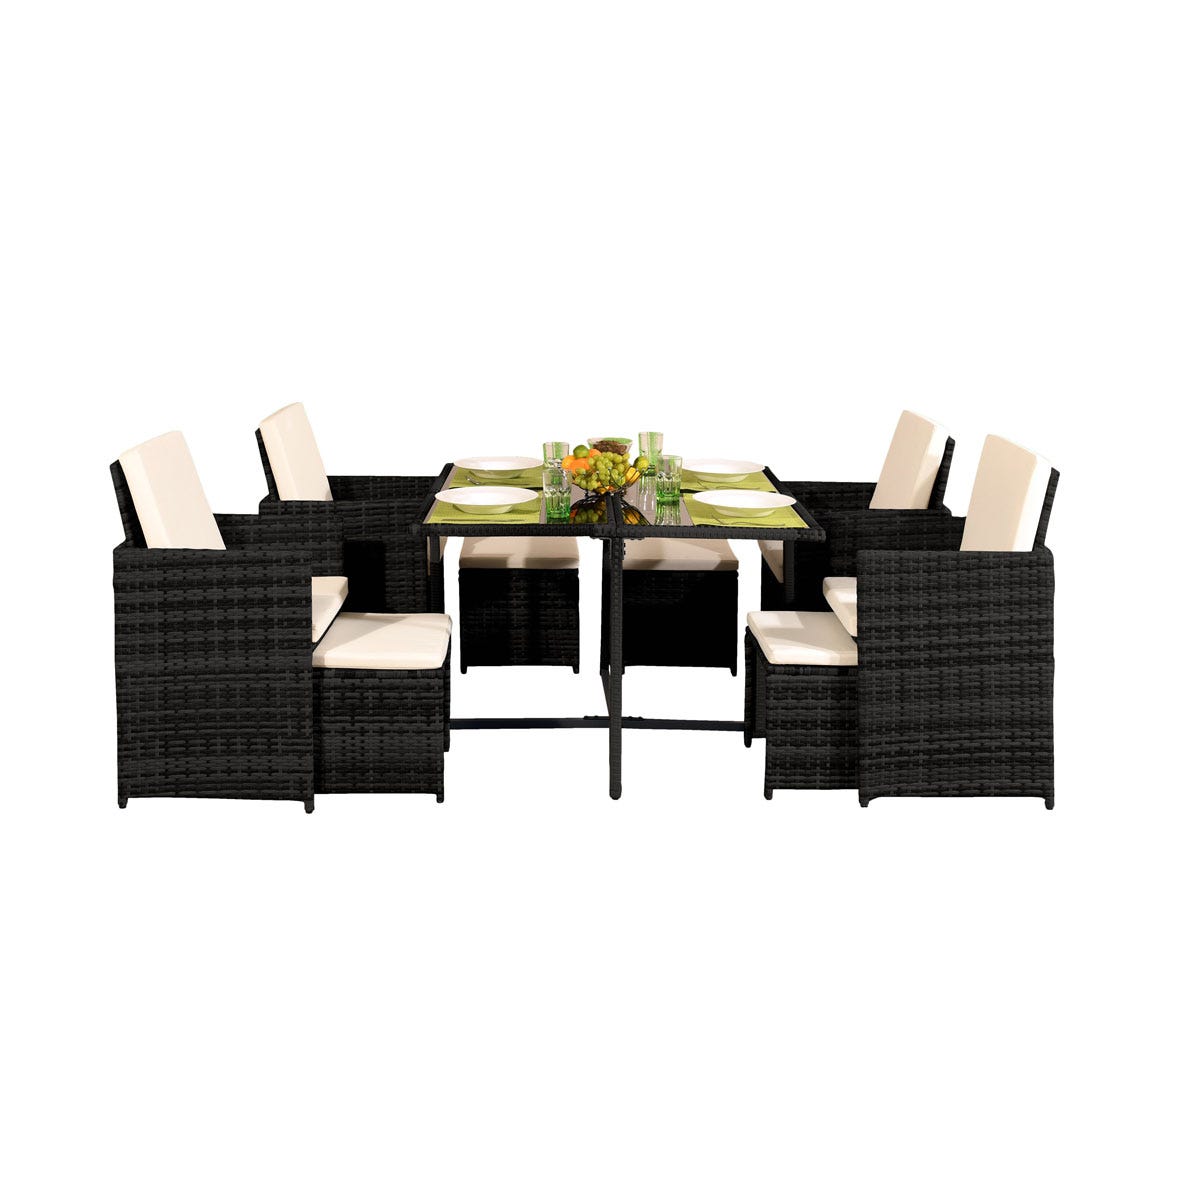 9Pc Rattan Garden Patio Furniture Set - 4 Chairs 4 Stools & Dining Table - Black